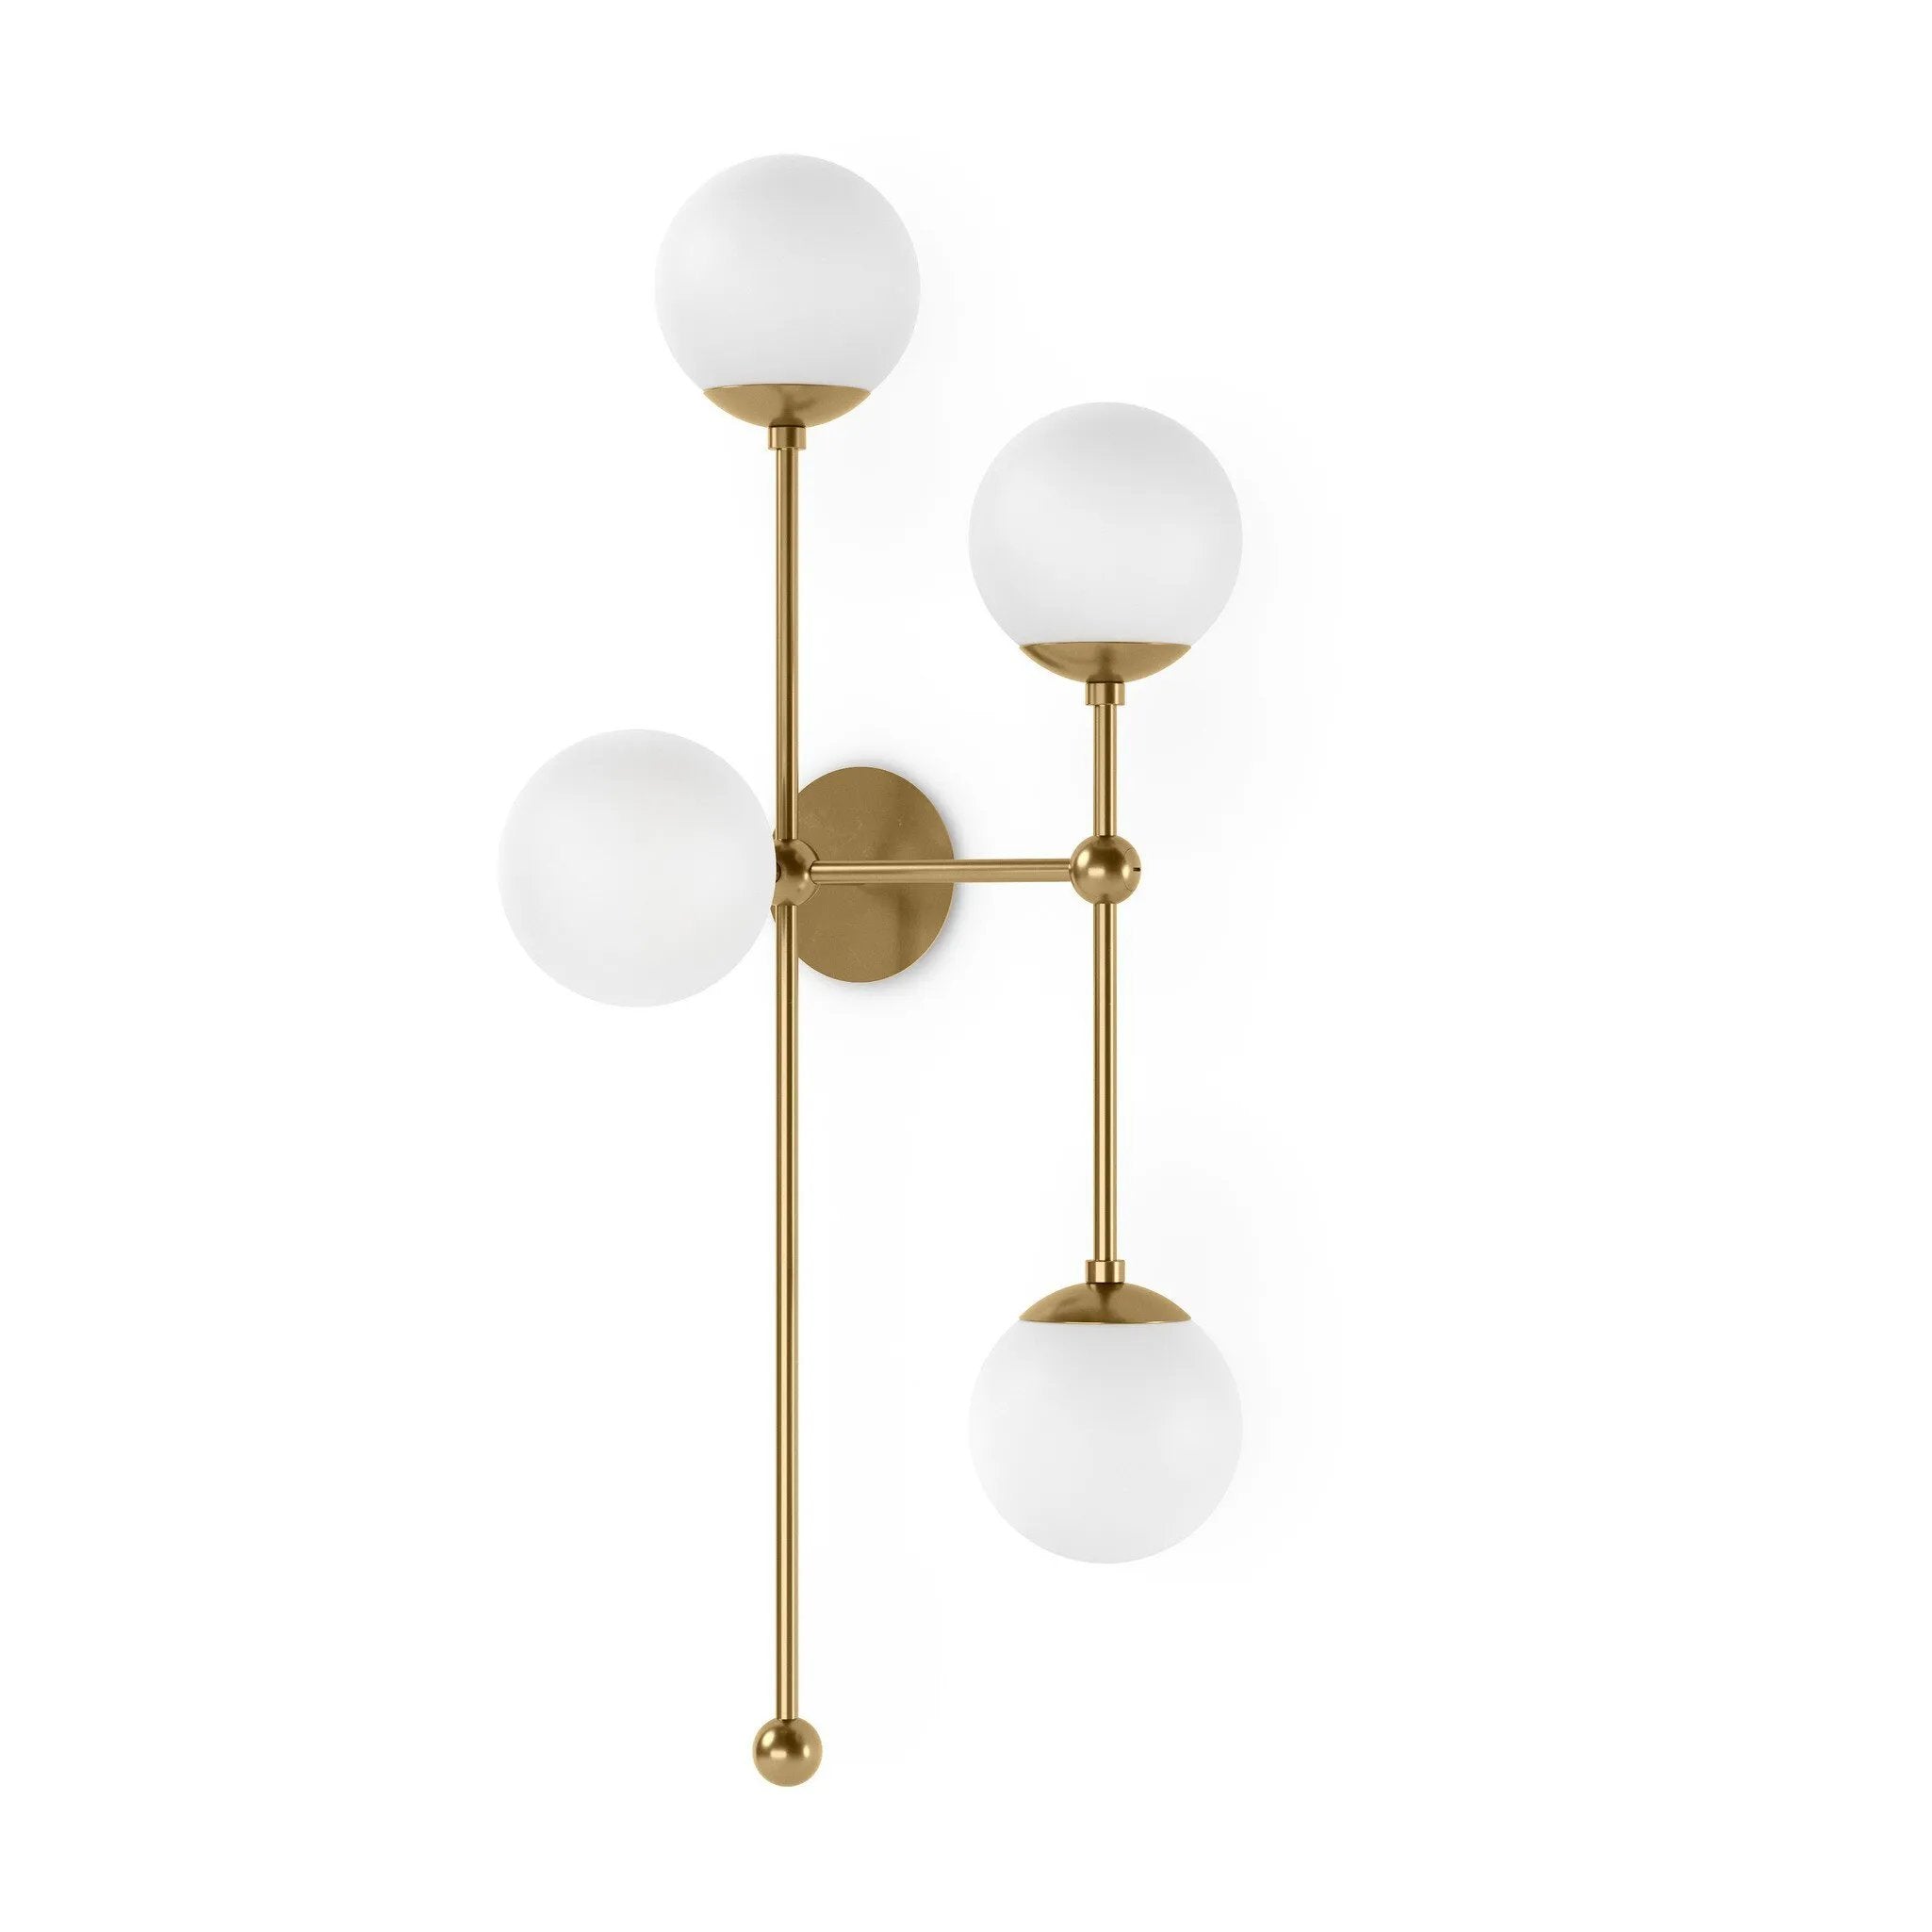 Matte glass spheres seem to extend and reach across smooth brass rods. Each globe is individually blown, shaped and sculpted by hand through a one-hour process. Matte globes are specially manufactured to evenly diffuse light. Brass and glass are 98% recyclable. Designed and sustainably made in Poland by Schwung.Overall Dimensions13.75"w x 13. Amethyst Home provides interior design, new home construction design consulting, vintage area rugs, and lighting in the Calabasas metro area.